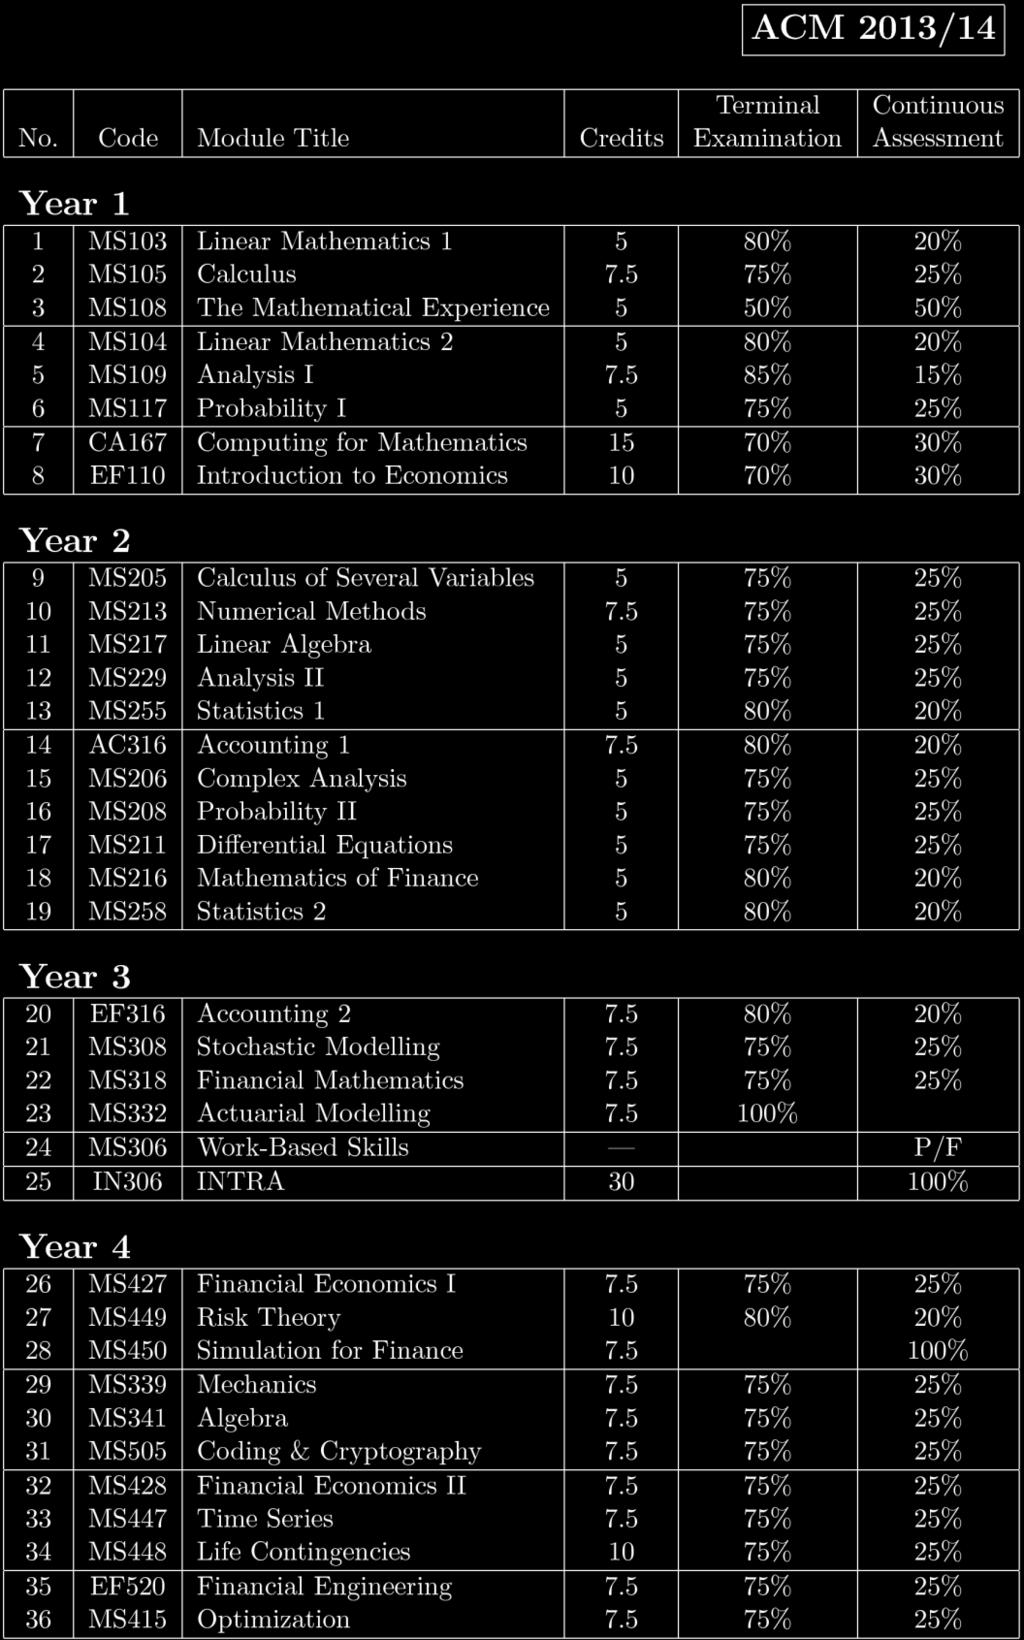 Table 7: 2013/14 Modules